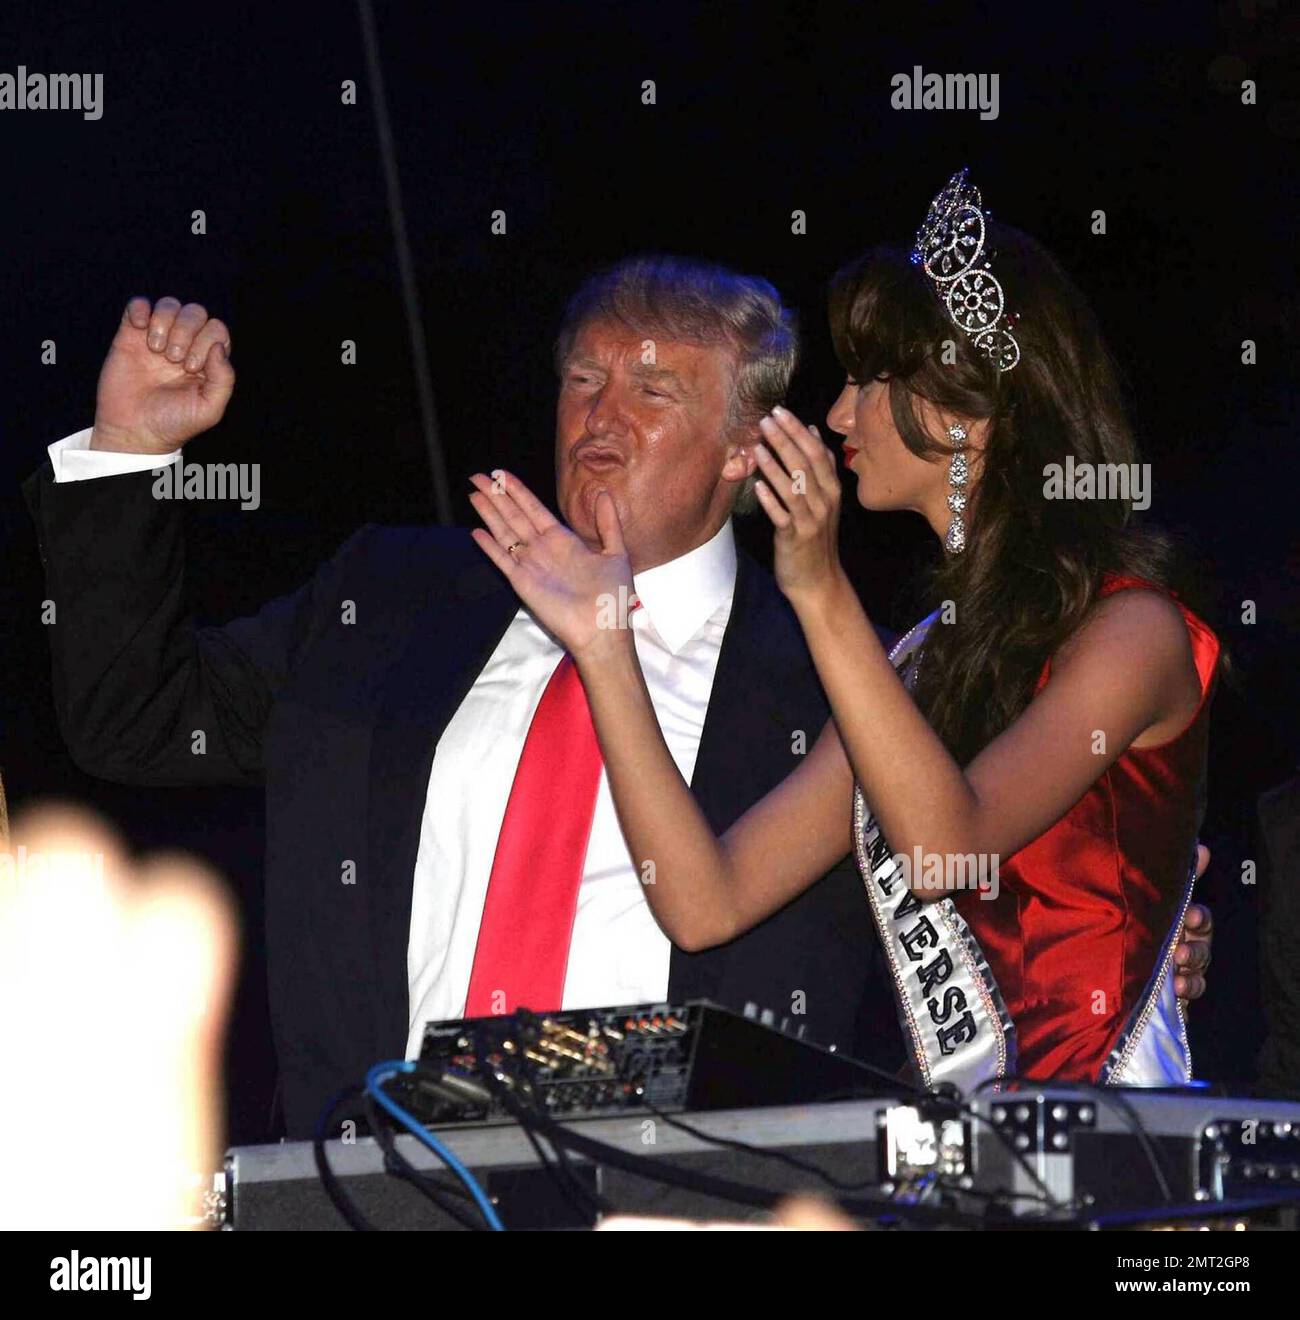 Donald Trump and Stefania Fernandez celebrate at the Coronation Ball after the Miss Universe pageant at Atlantis on Paradise Island in the Bahamas. 8/23/09. Stock Photo